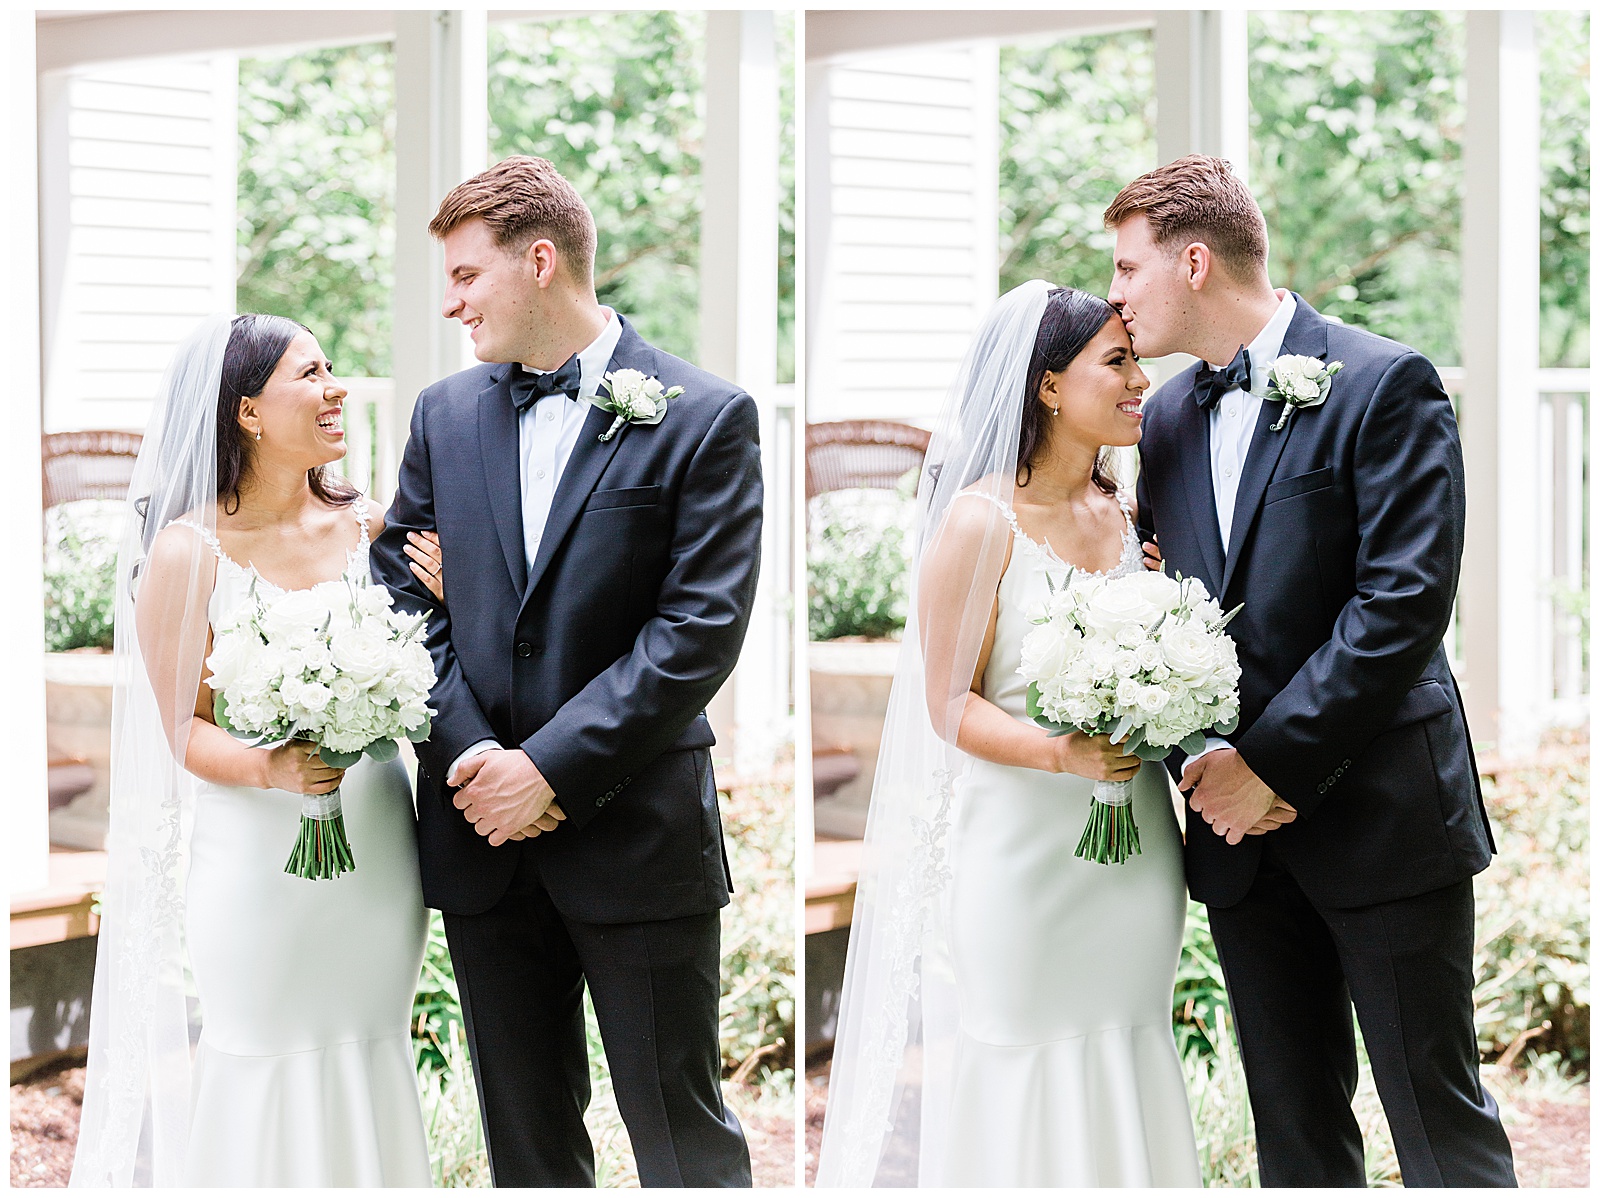 bride-and-groom-portraits-kristina-staal-photography.jpg